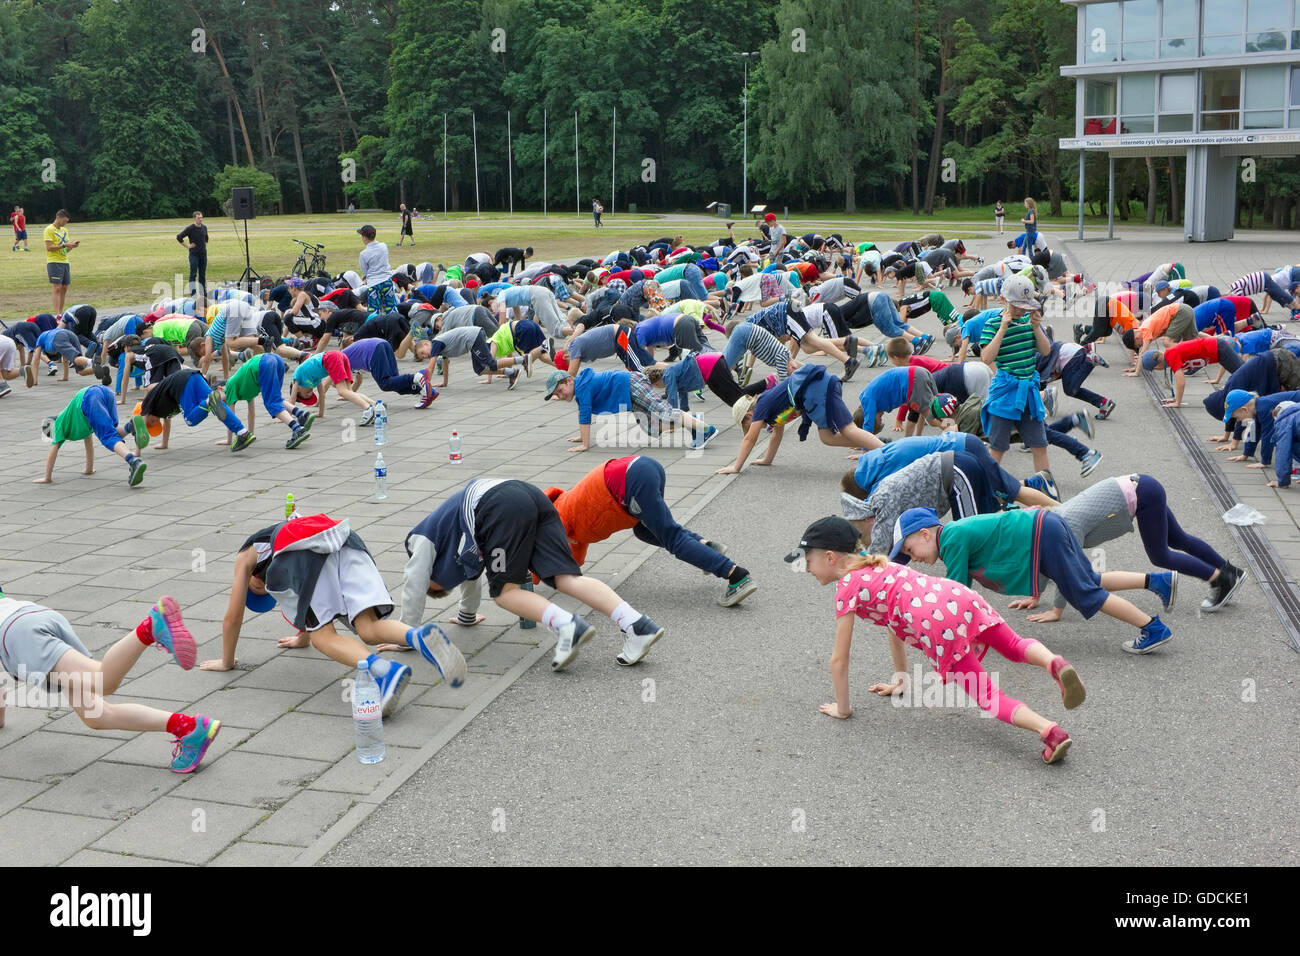 VILNIUS, LITHUANIA - JUNE 17, 2016: Morning sport training of young children -  athletes in the central city park Vingis. Action Stock Photo